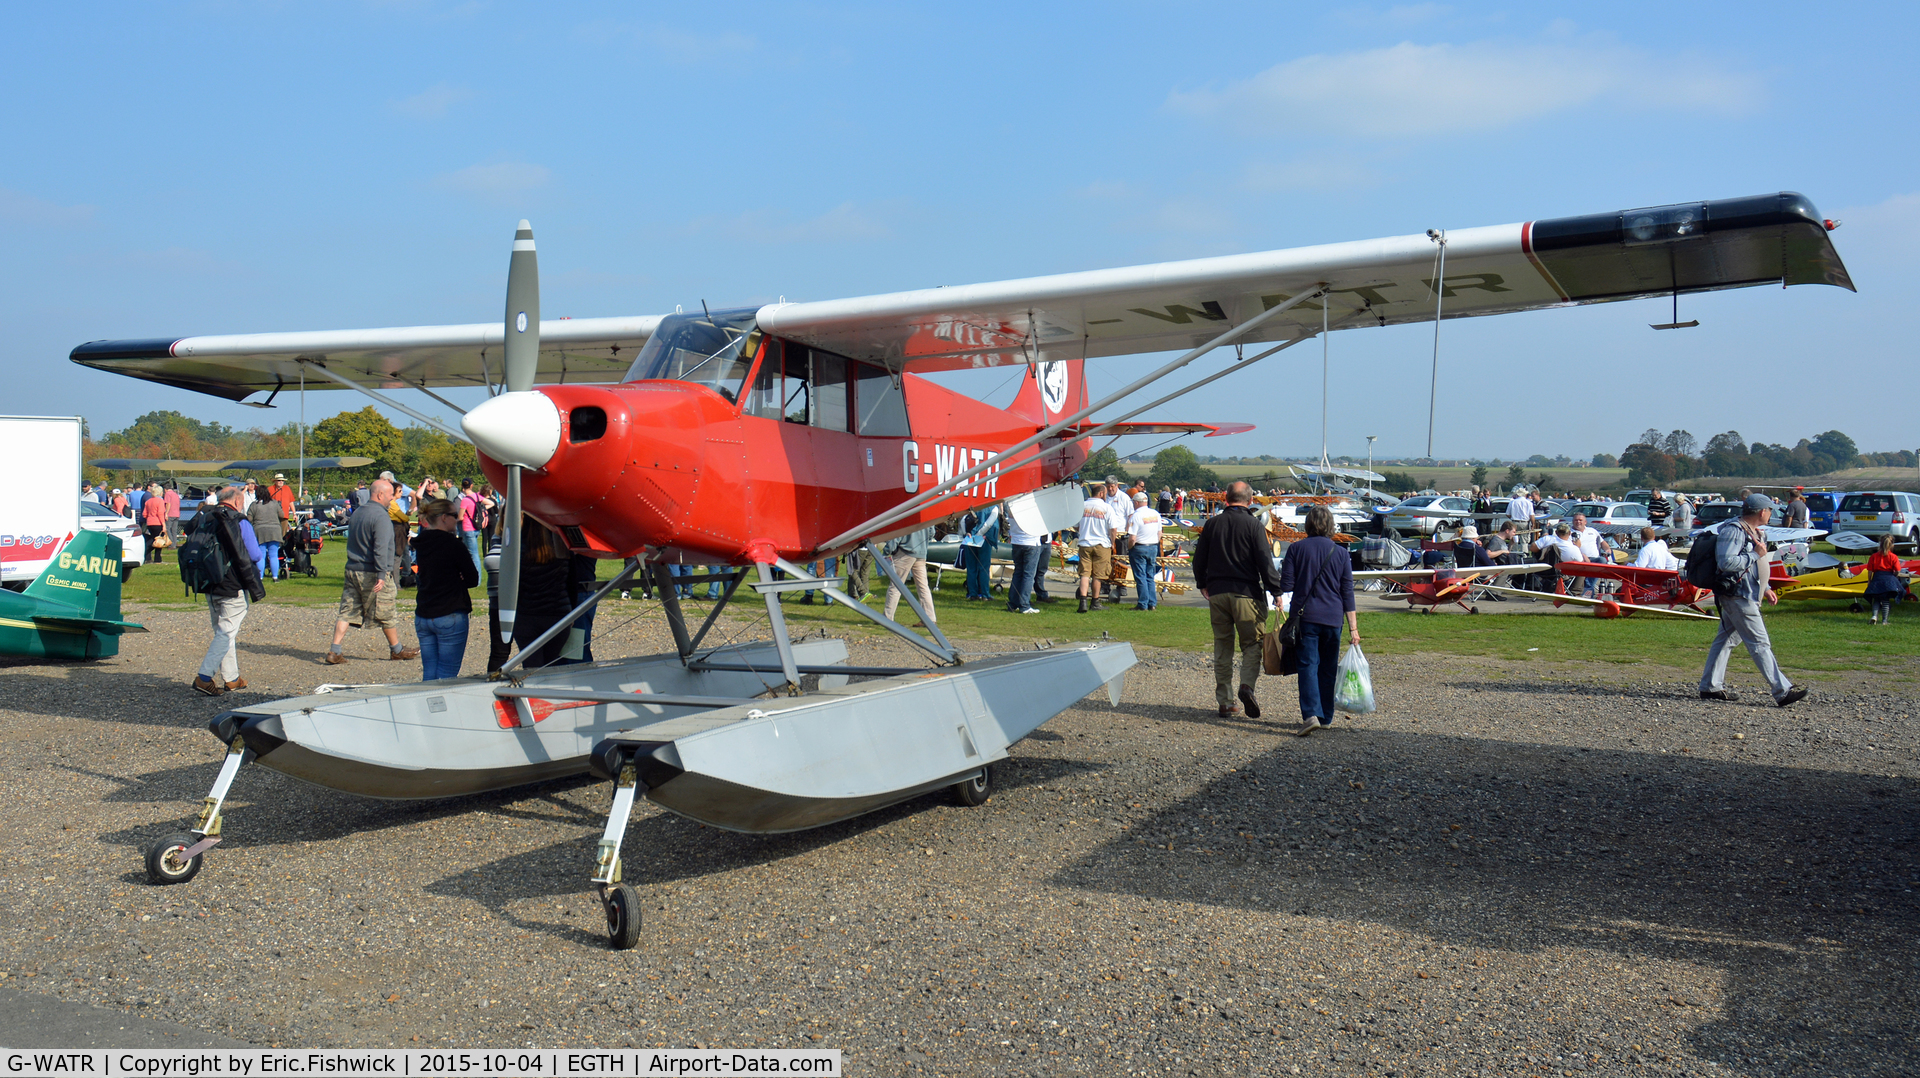 G-WATR, 1988 Christen A-1 Husky C/N 1040, 4. G-WATR at The Shuttleworth 'Uncovered' Airshow (Finale,) Oct. 2015.